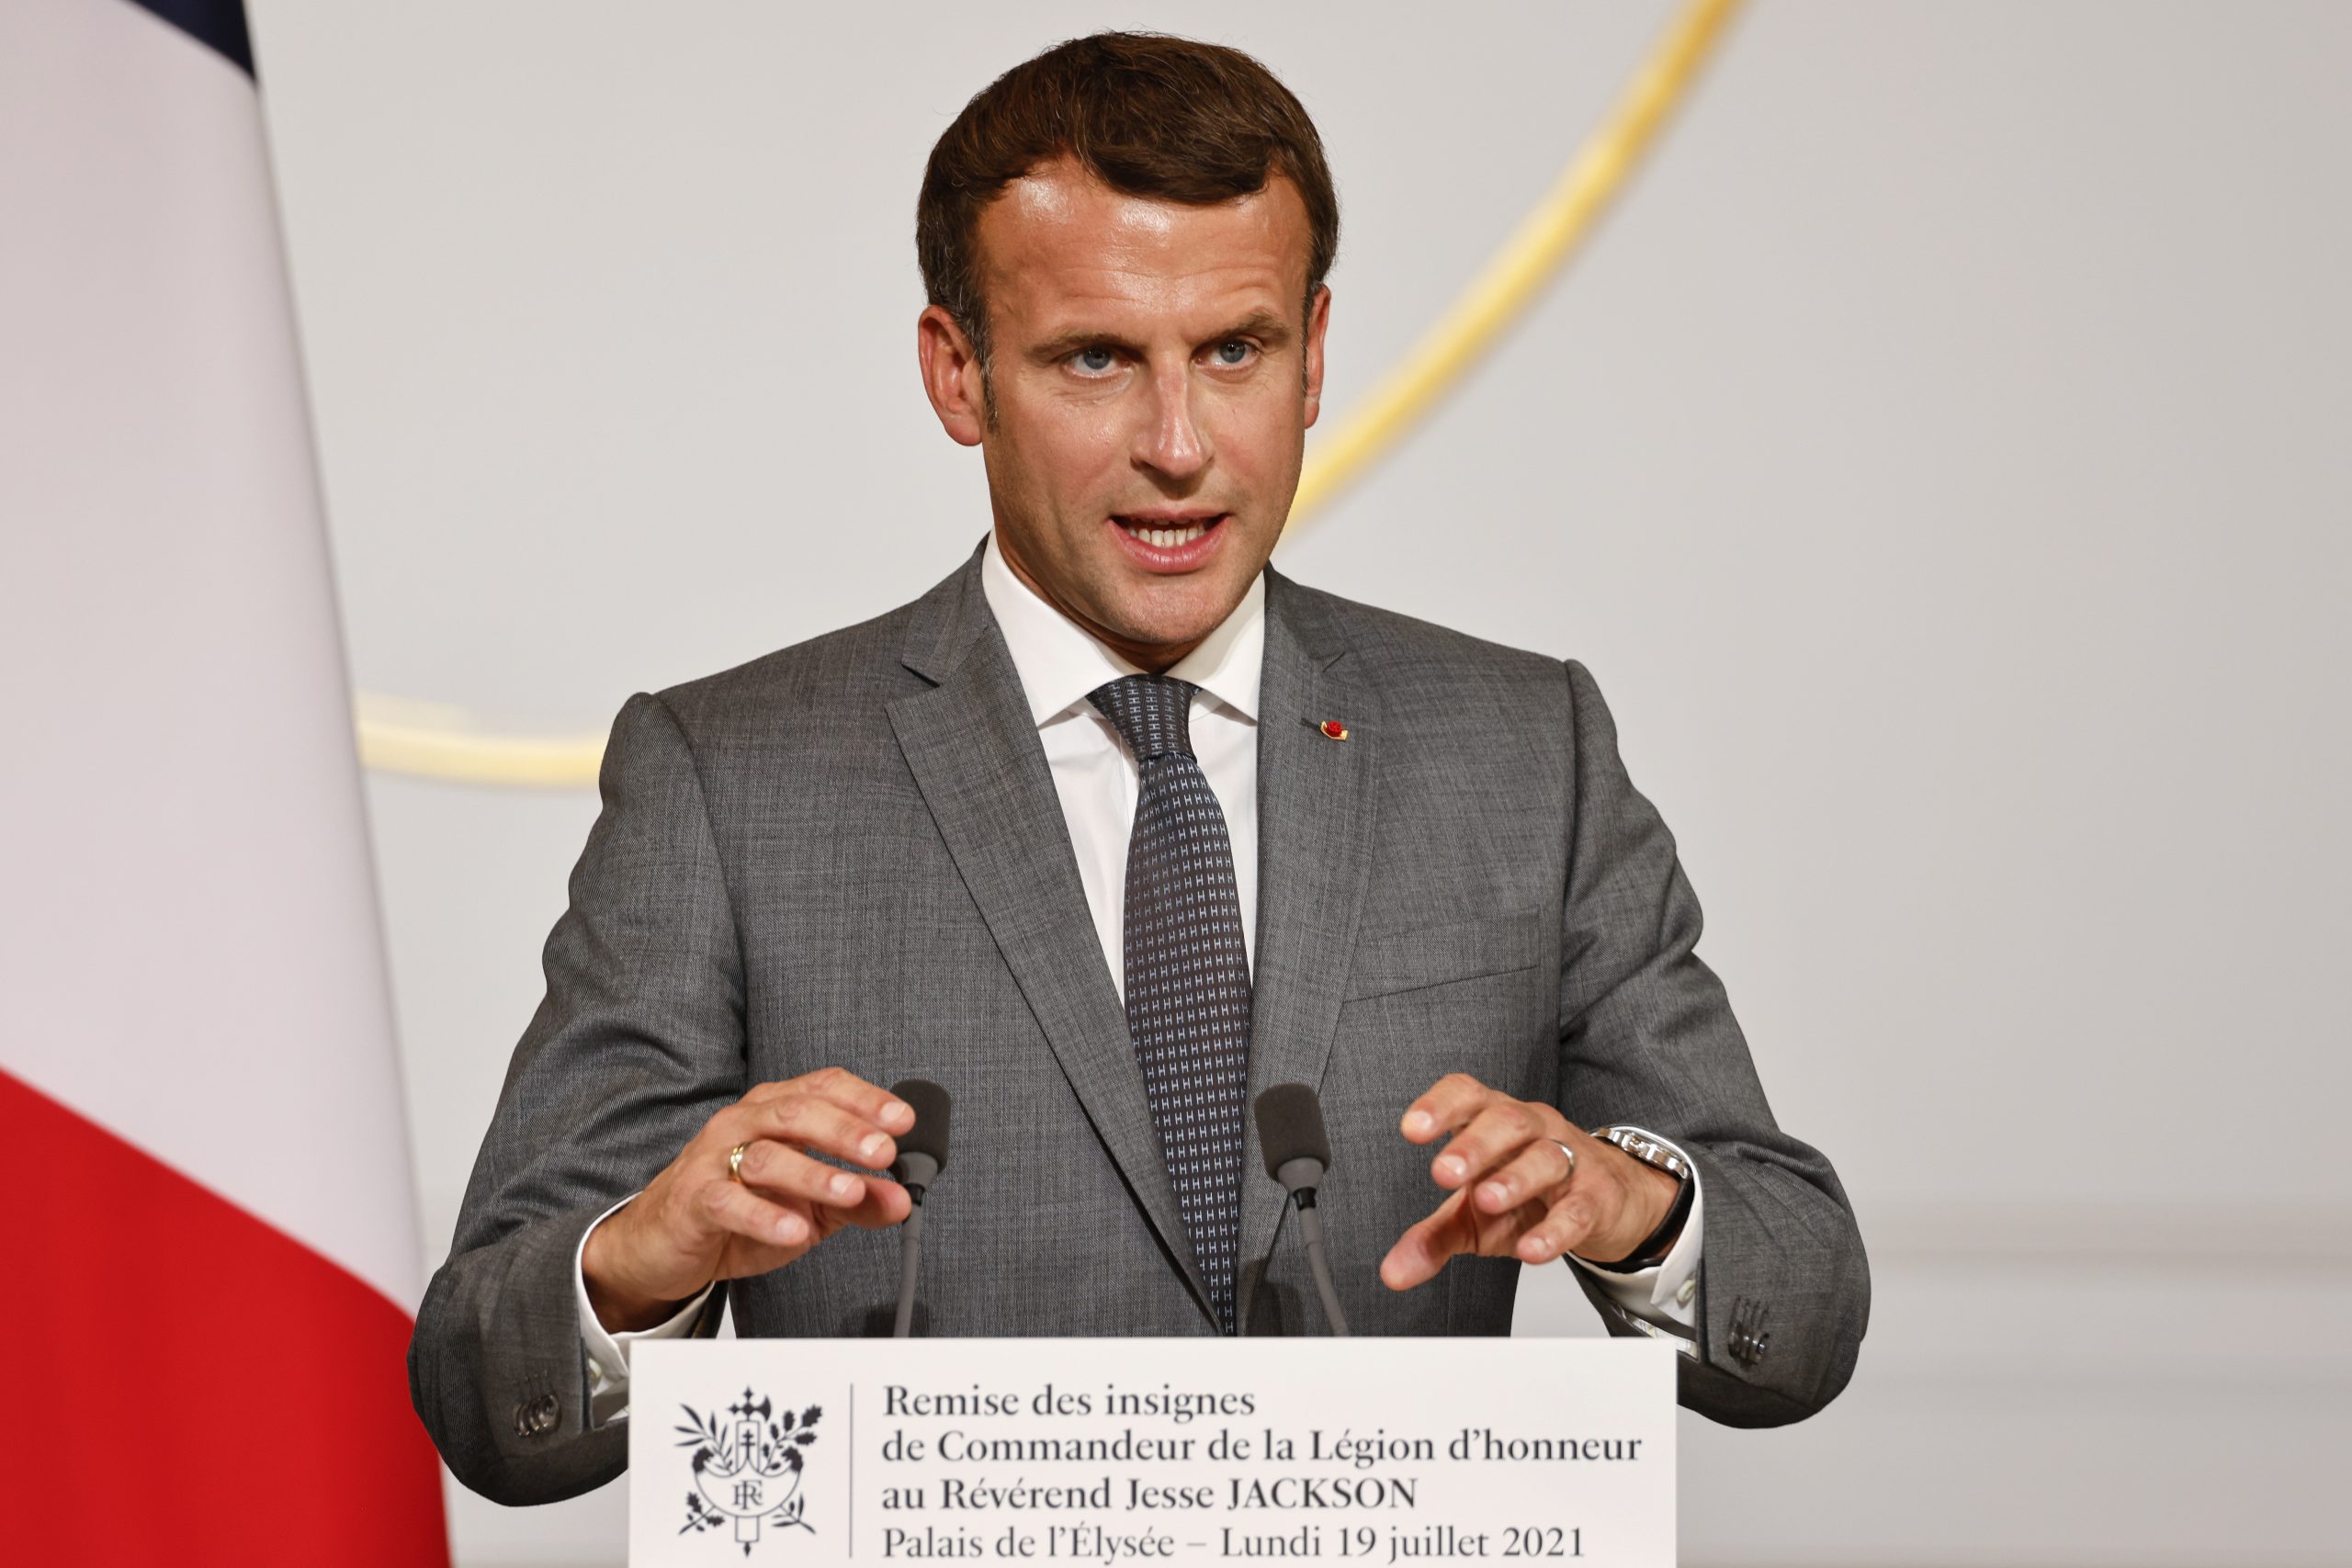 epa09353504 French President Emmanuel Macron delivers a speech during a ceremony to award Veteran American civil rights activist Reverend Jesse Jackson (not pictured) with the Legion of Honour at the Elysee Palace in Paris, France, 19 July 2021.  EPA/LUDOVIC MARIN / POOL  MAXPPP OUT